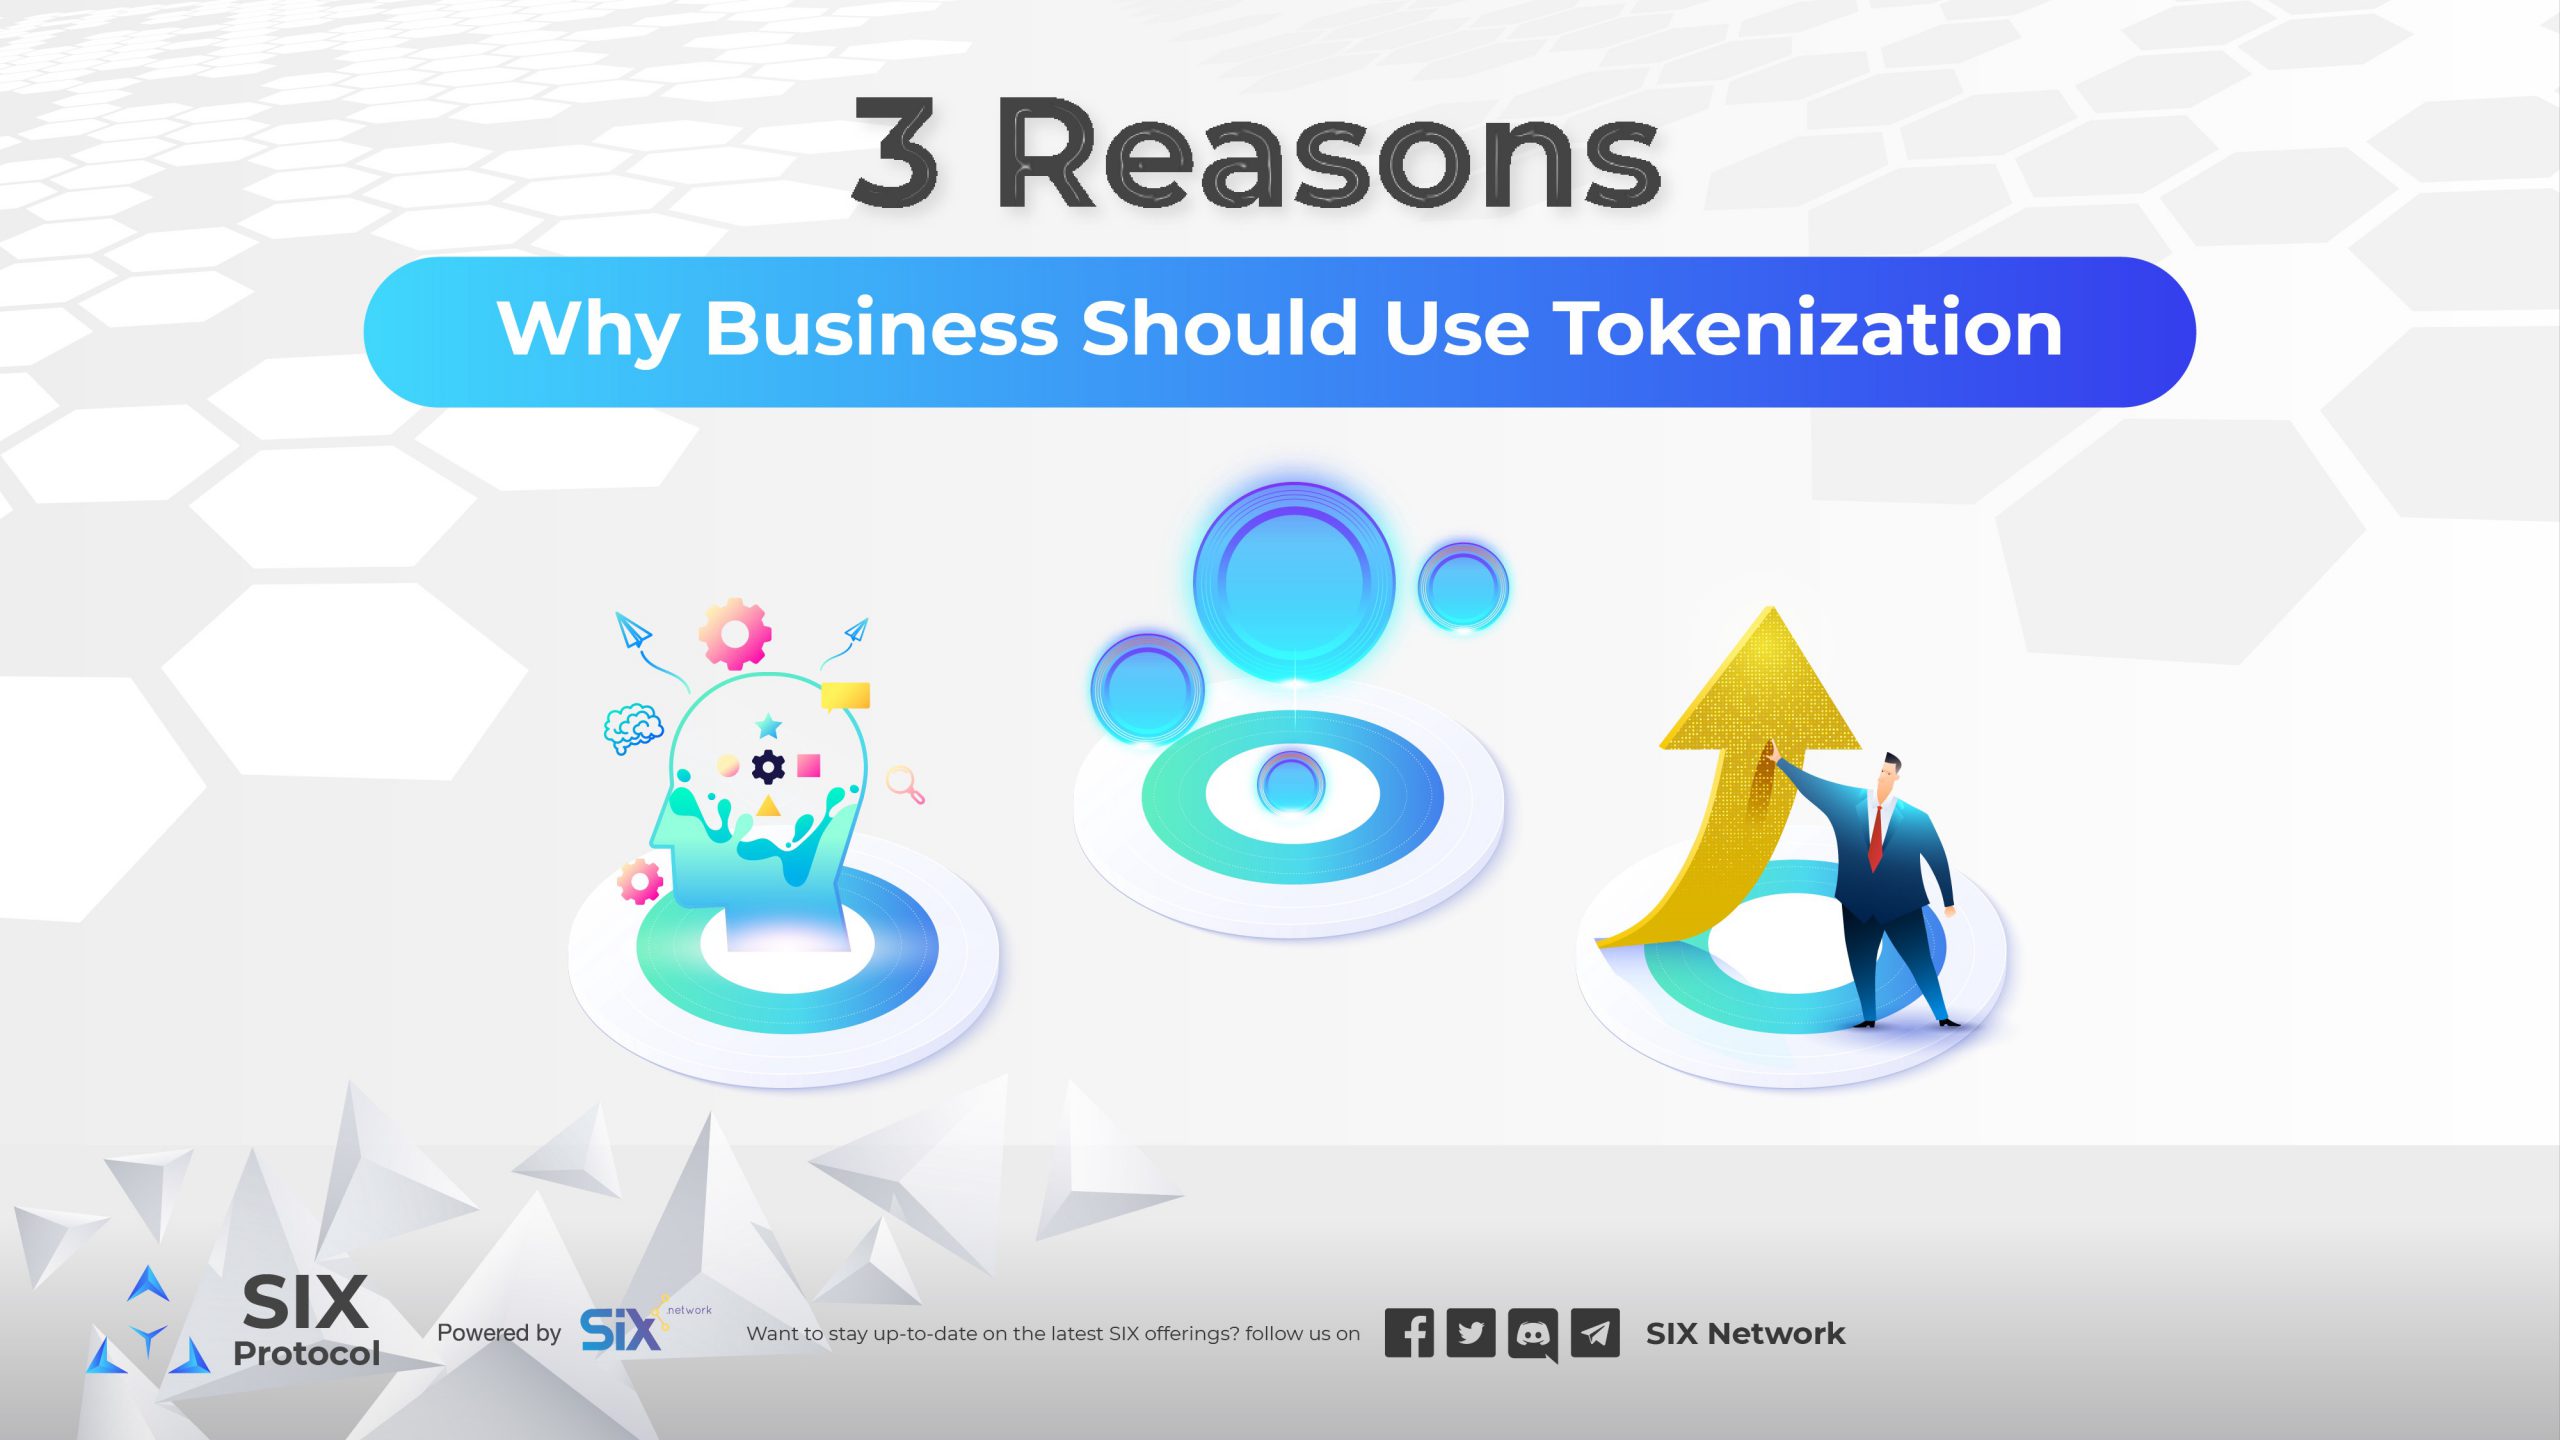 3 Reasons Why Business Should Use Tokenization